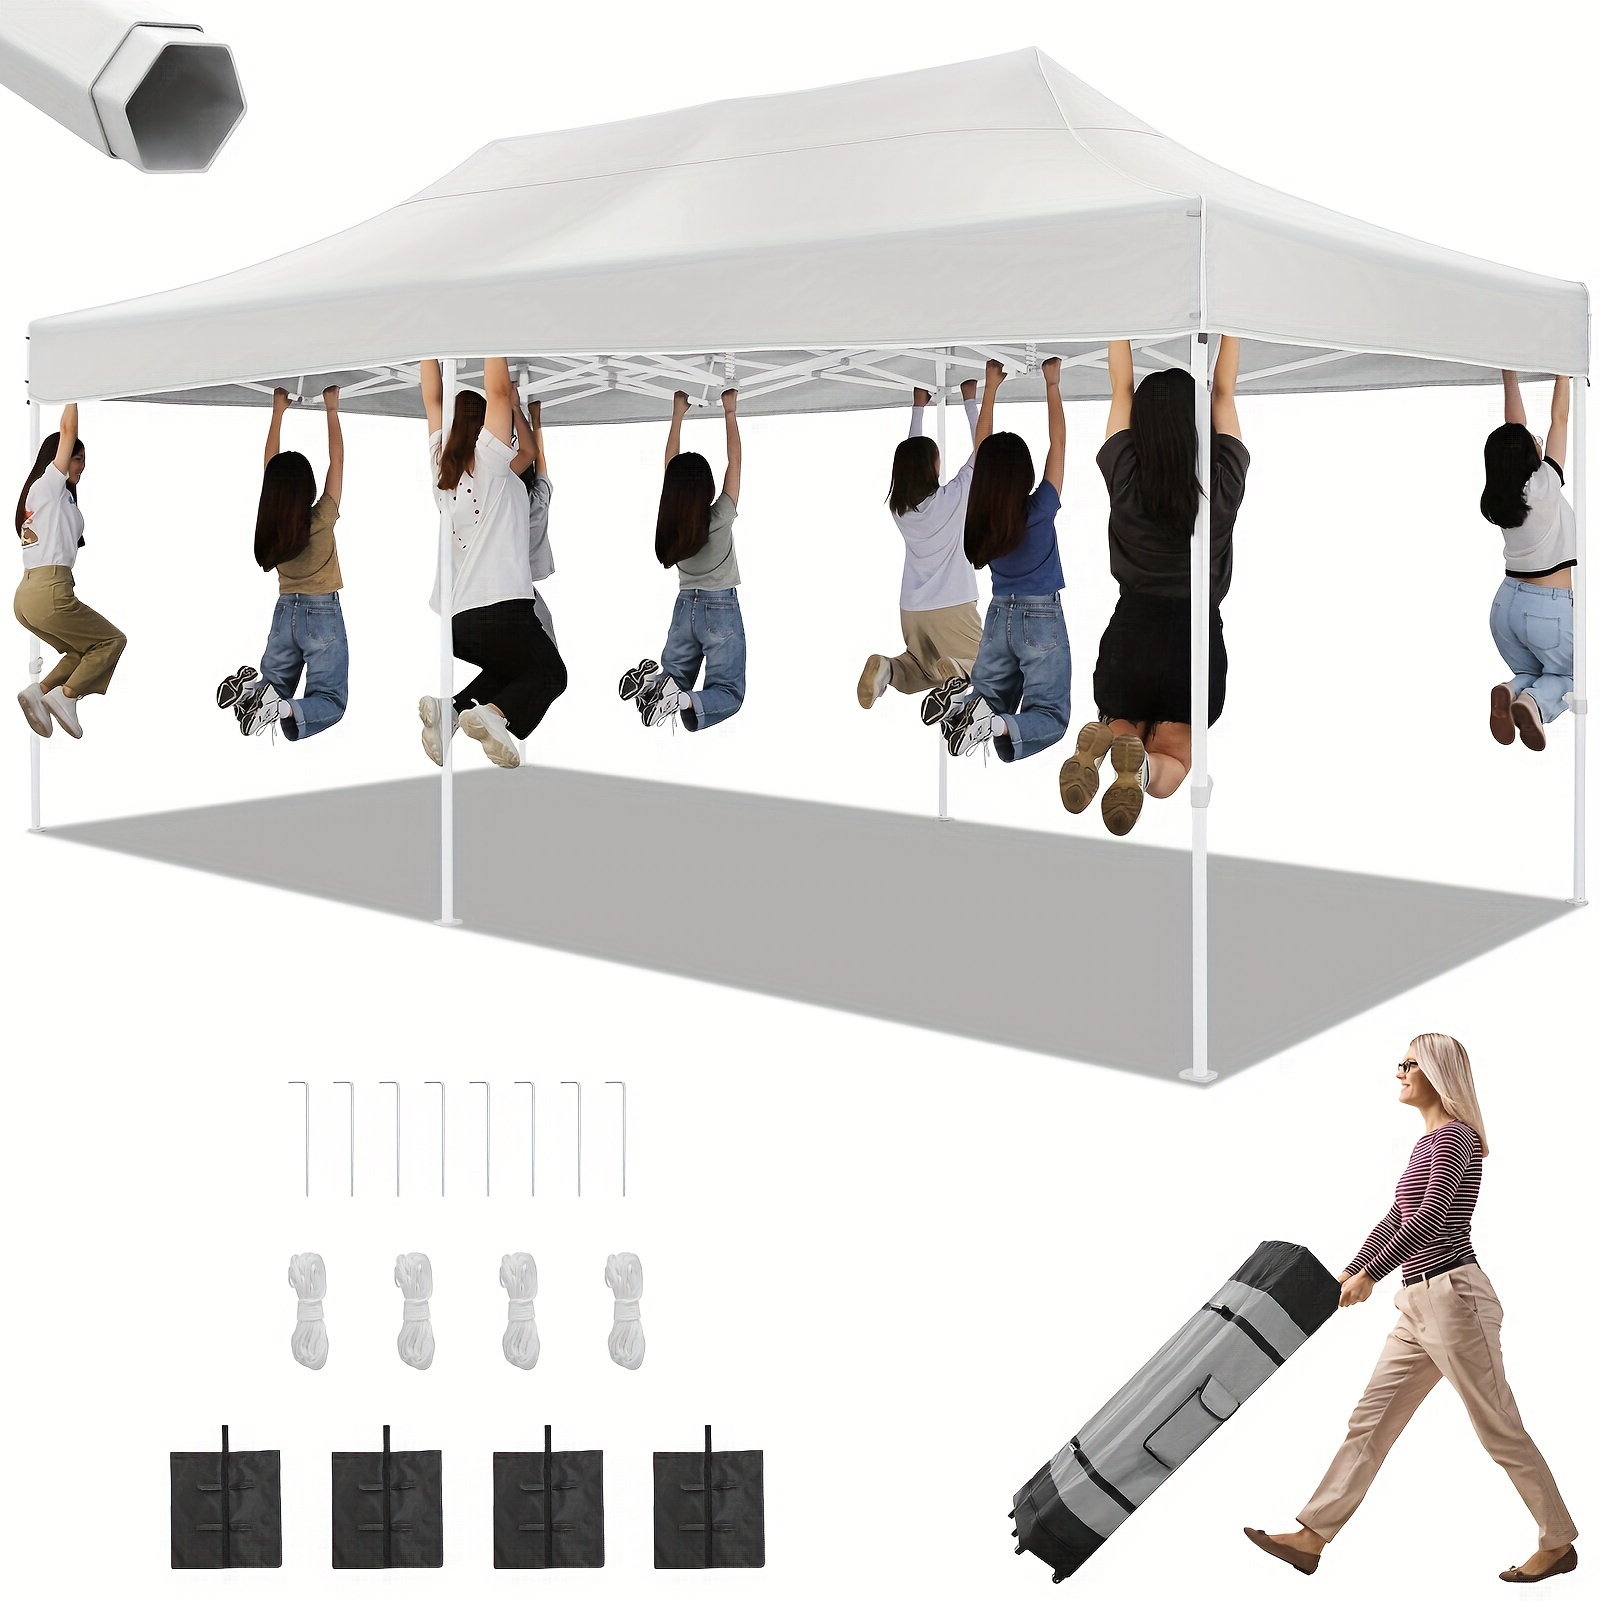 

Tents For Parties, 10x20 Pop Up Canopy Tent Heavy Duty, Commercial Outdoor Canopy Tents For Event Wedding, All Season Wind Uv 50+&waterproof Gazebo With Roller Bag, Thickened Legs